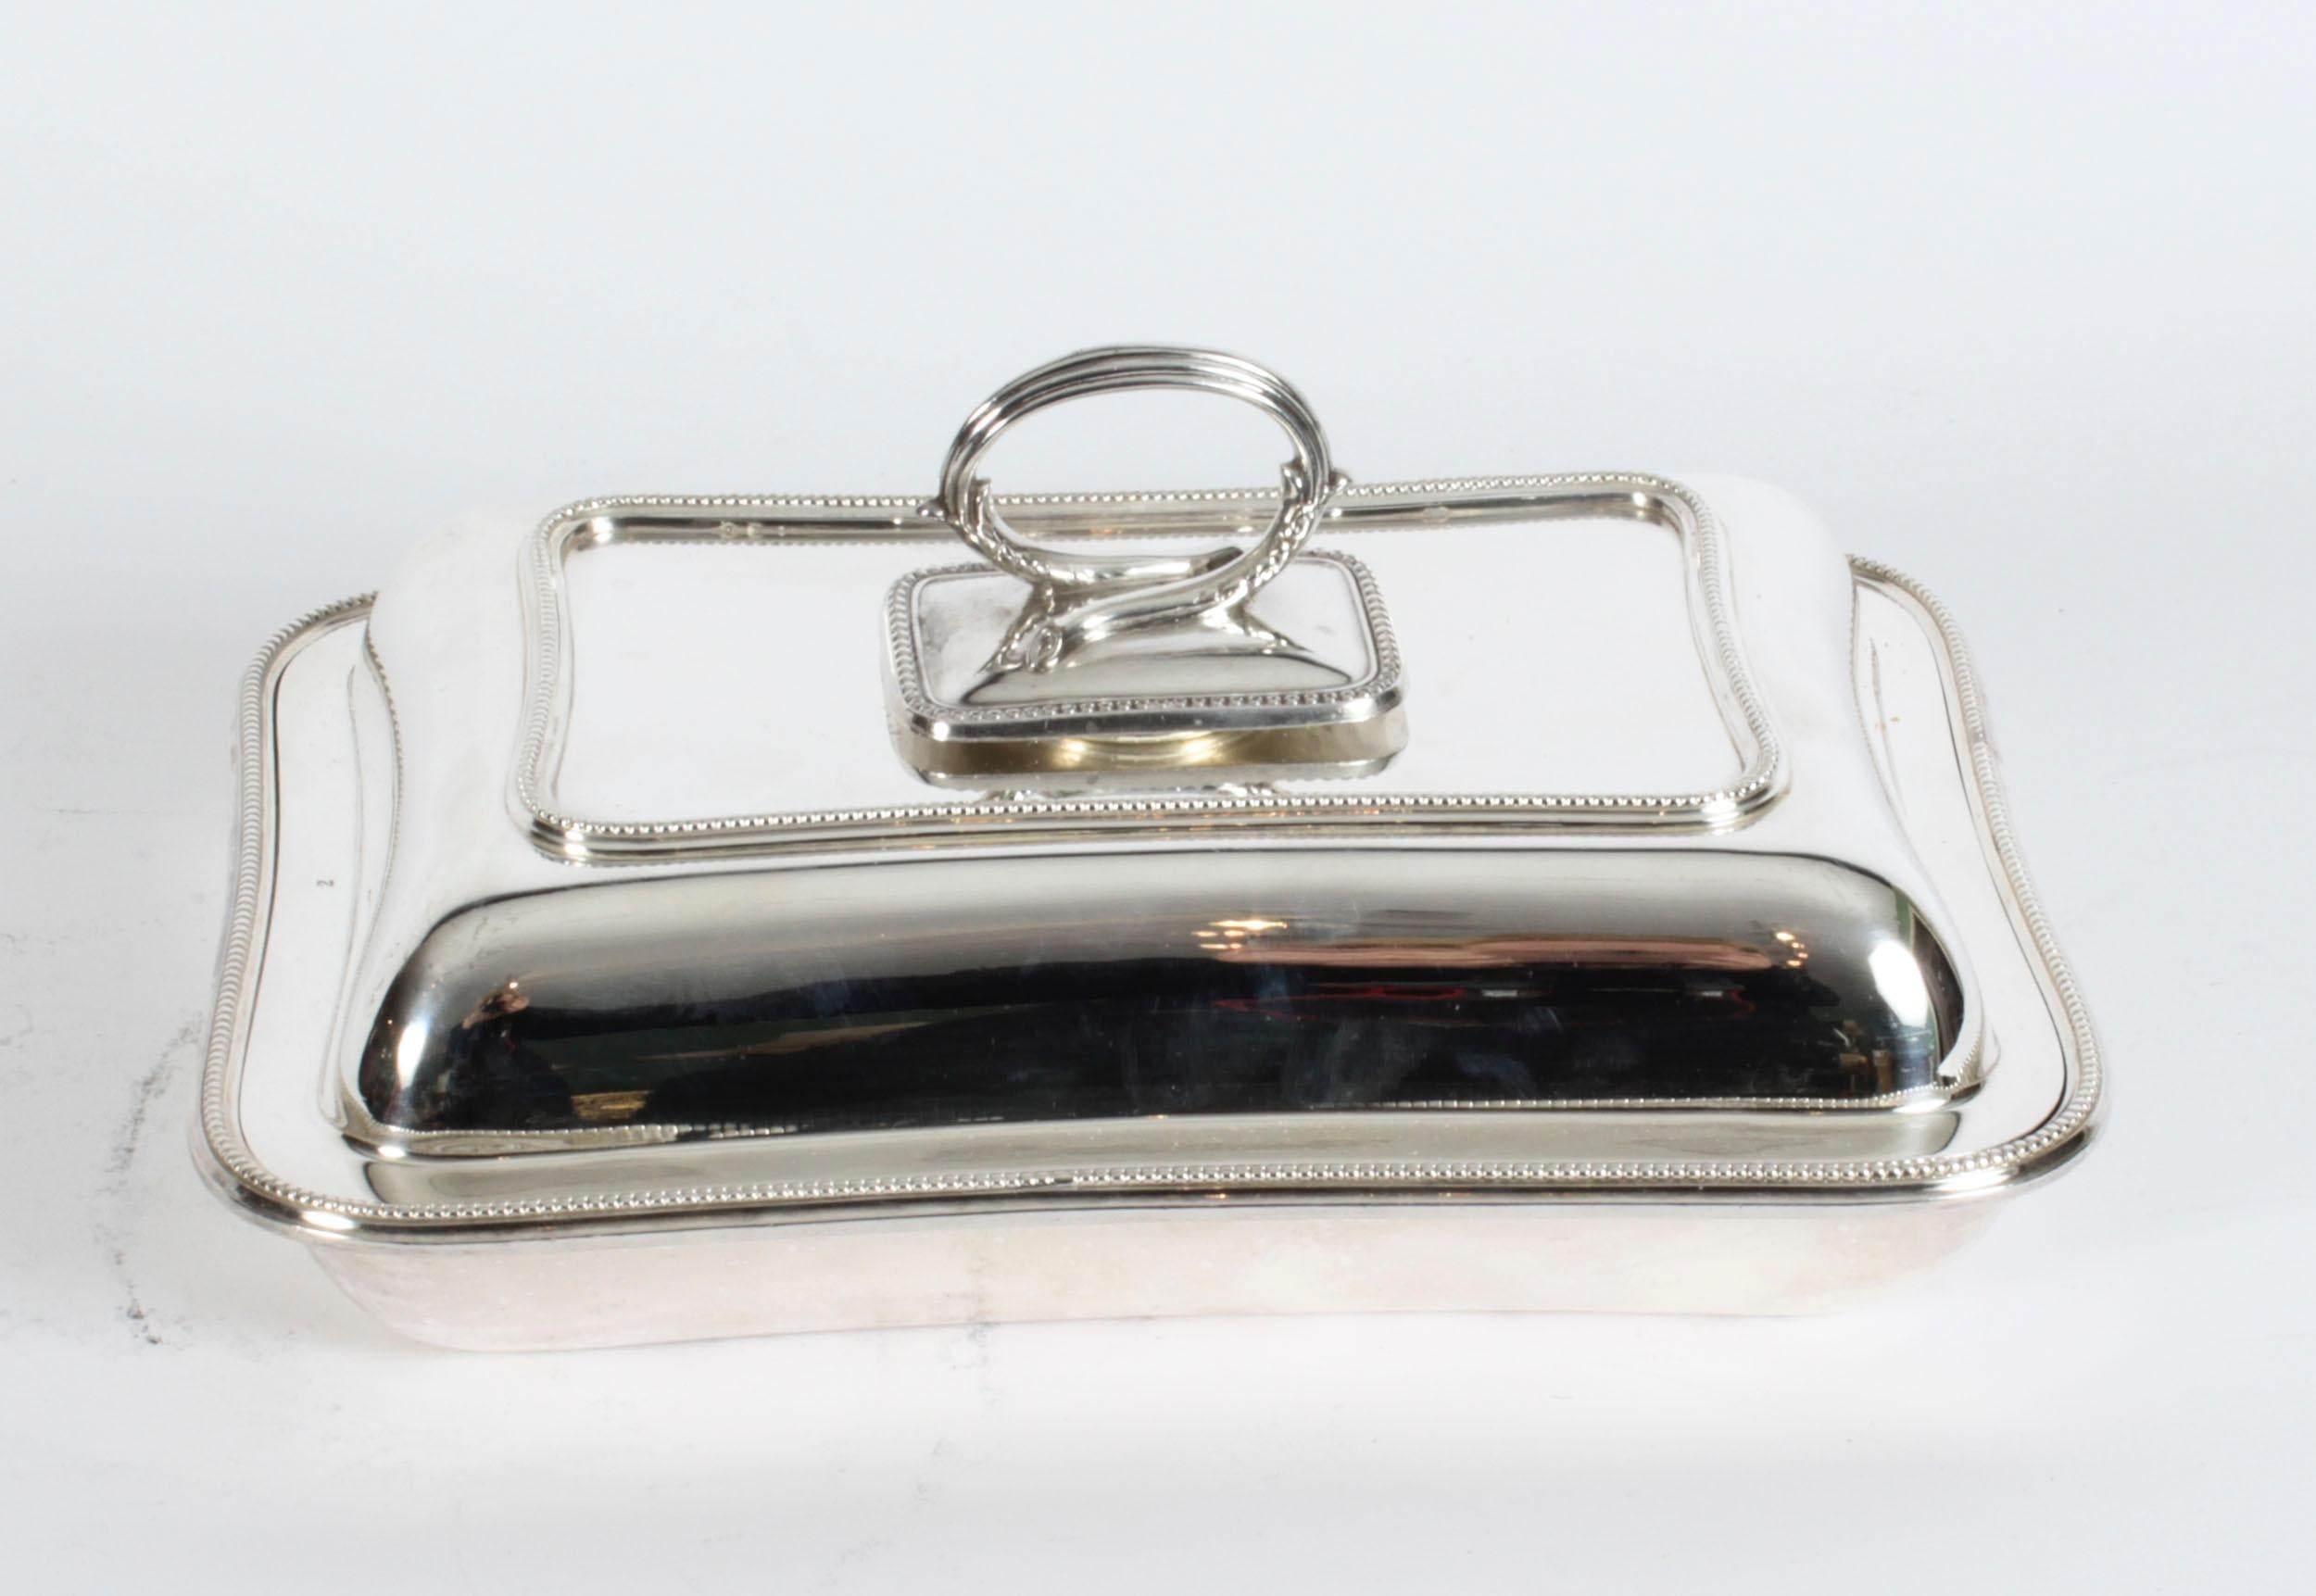 This is an exquisite and rare antique English silver plated entree dish, bearing the cross arrow mark of William Hutton & Sons, circa 1850 in date.
 
The entree dish features a rectangular shape with elegant beaded decoration to the dish, lid and